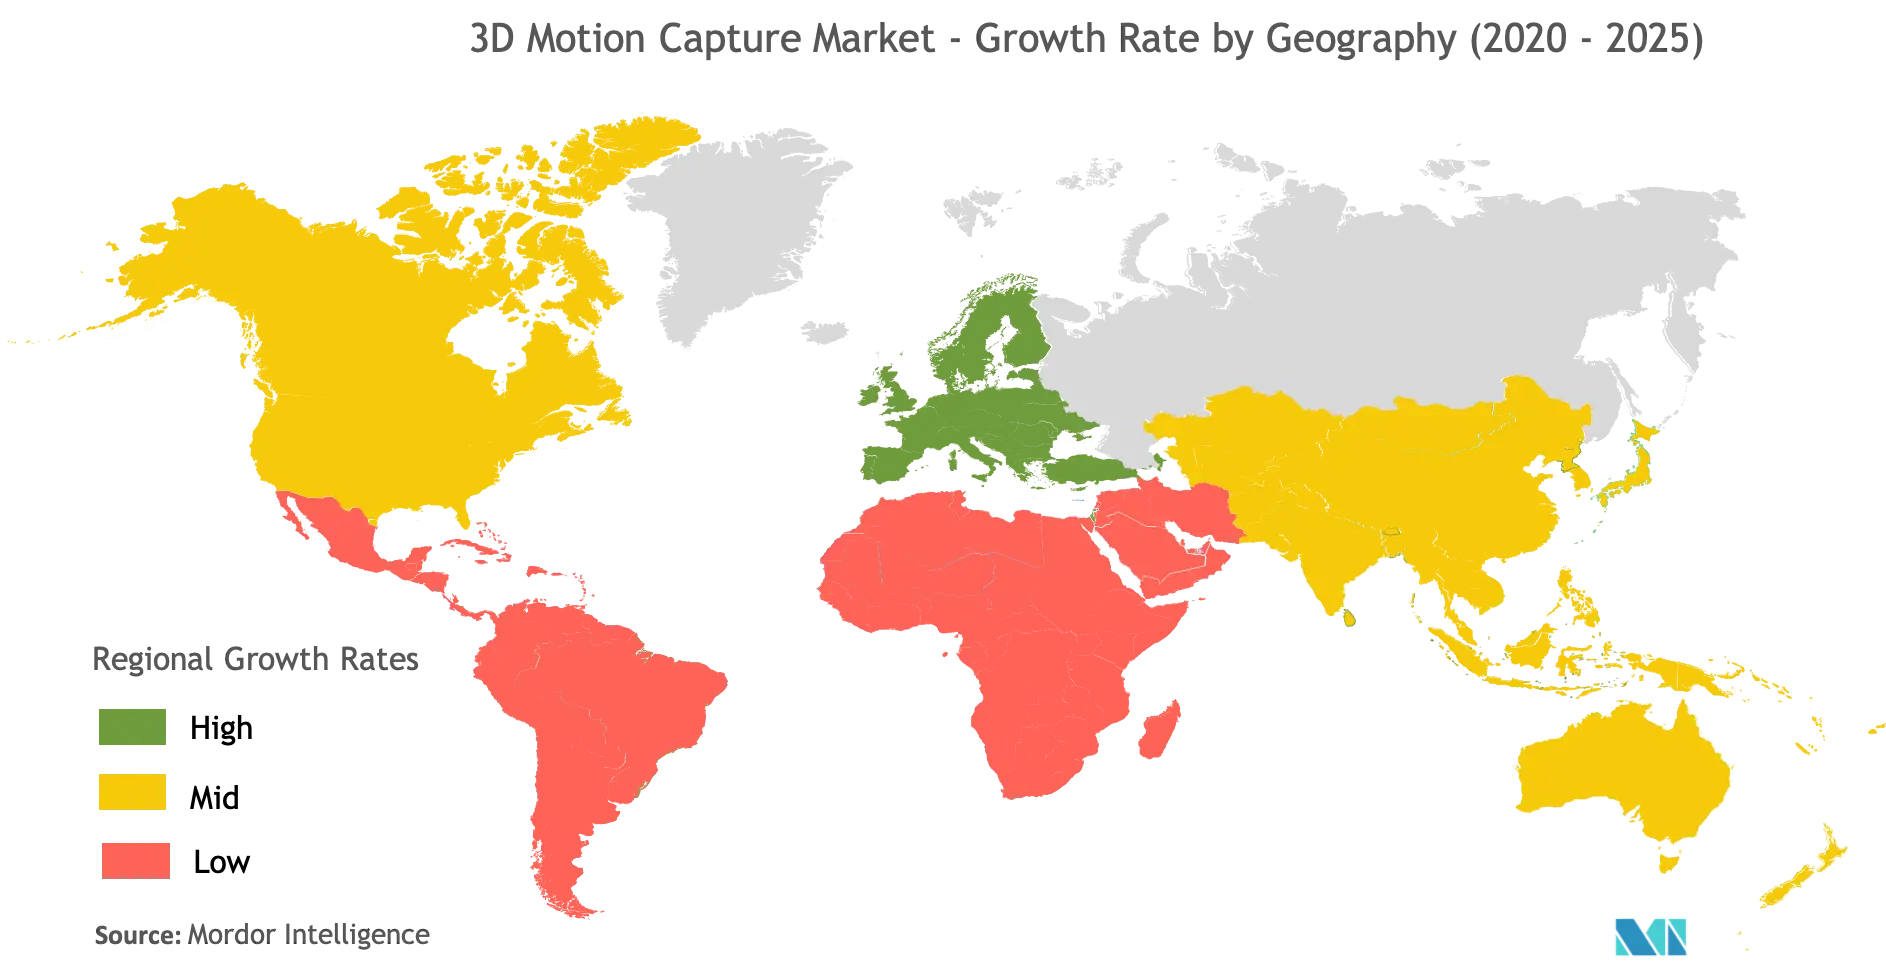 3D Motion Capture Market Growth Rate By Region